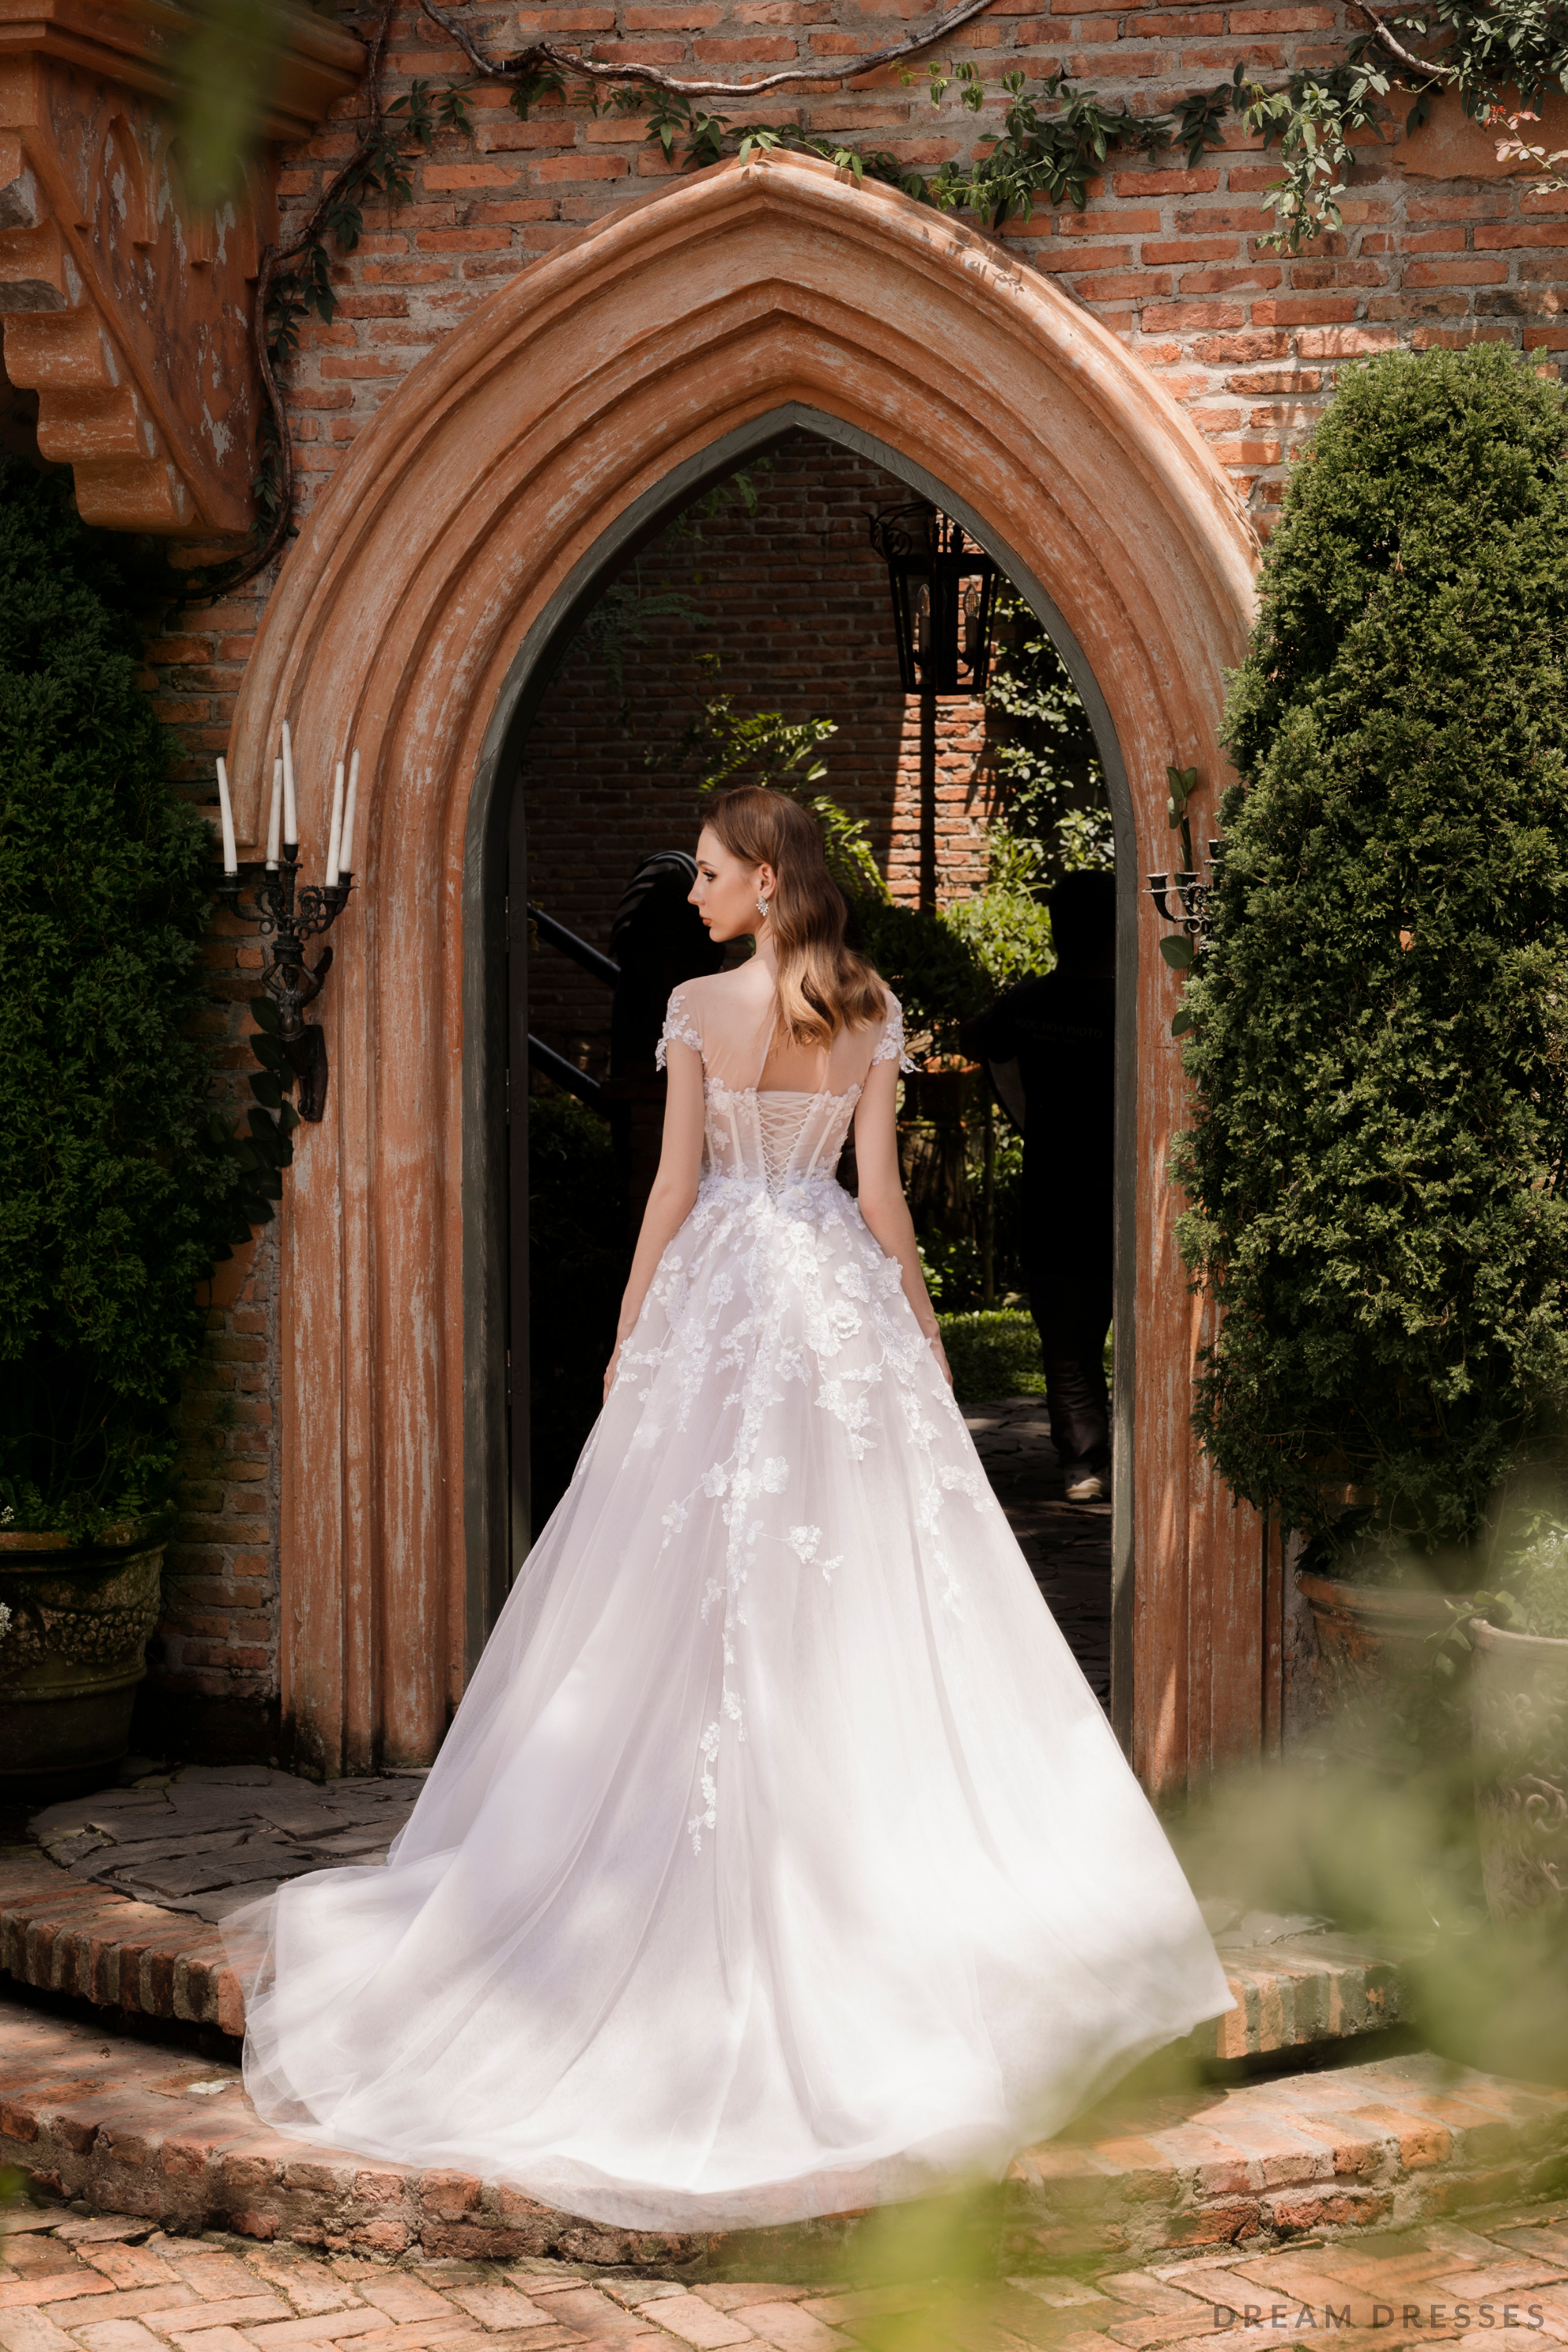 Illusion Neckline Ball Gown with Floral Lace (#JOELLE)